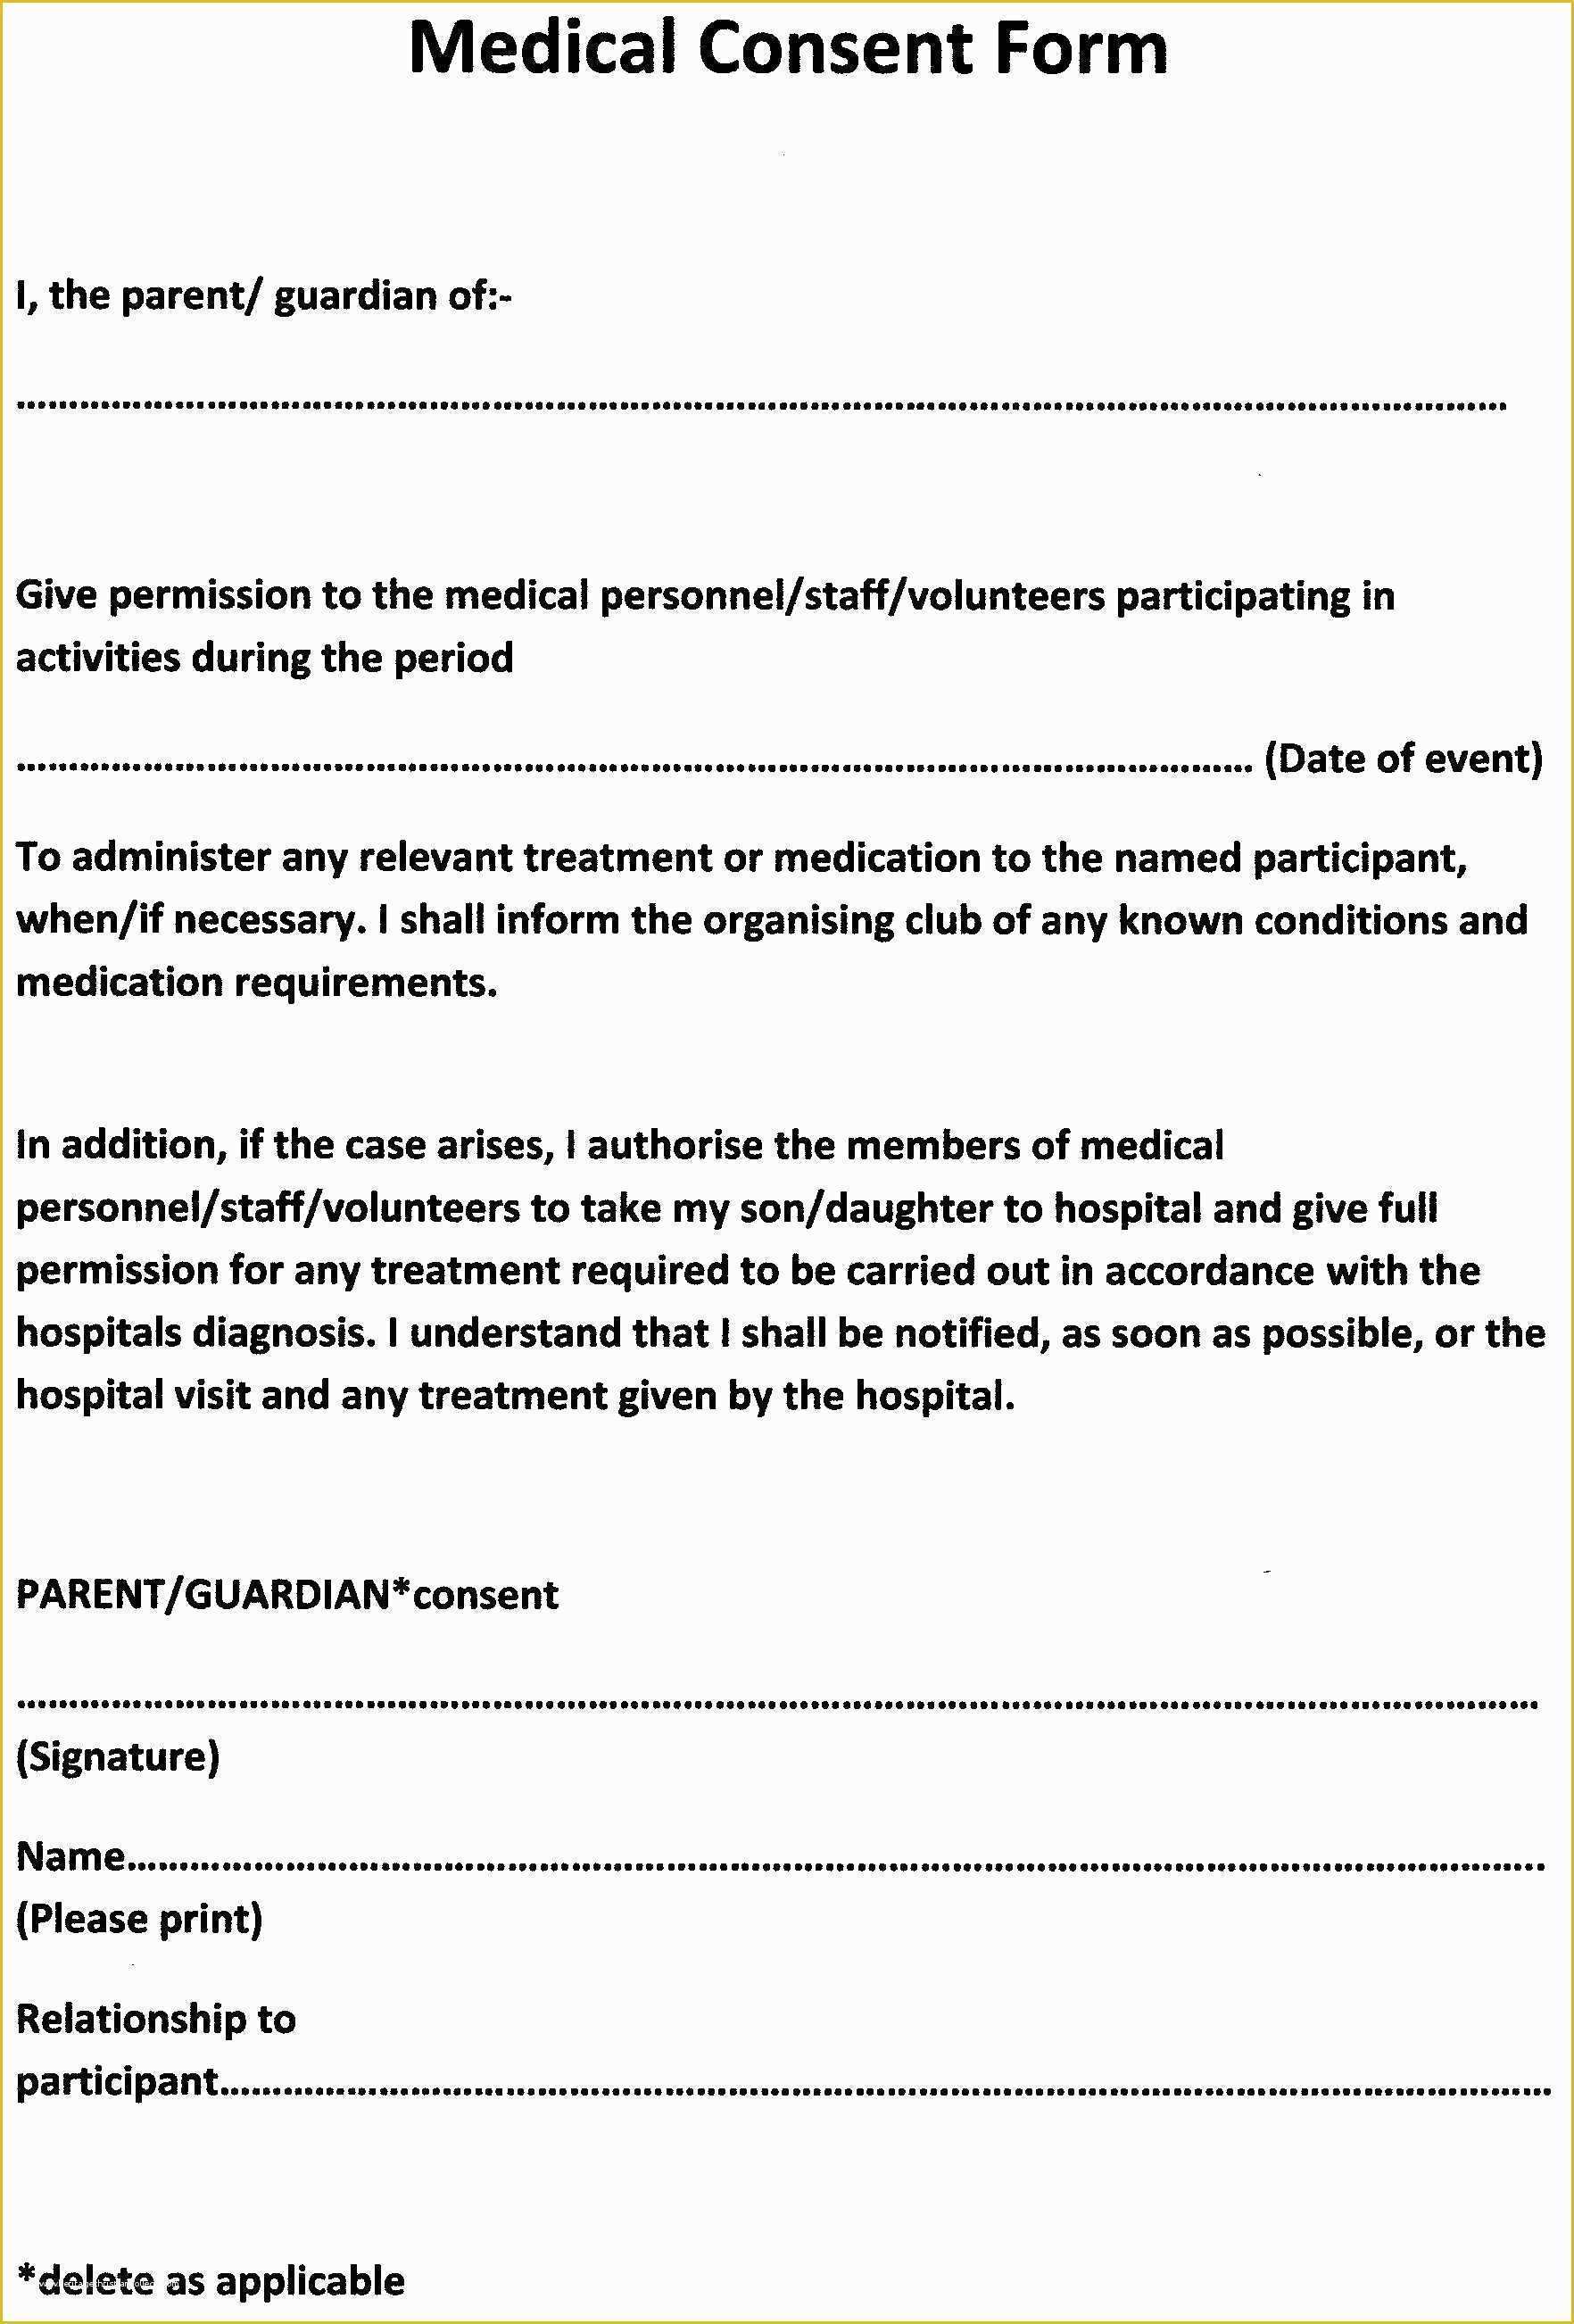 Free Medical Consent form Template Of Medical Consent form Medical Consent form